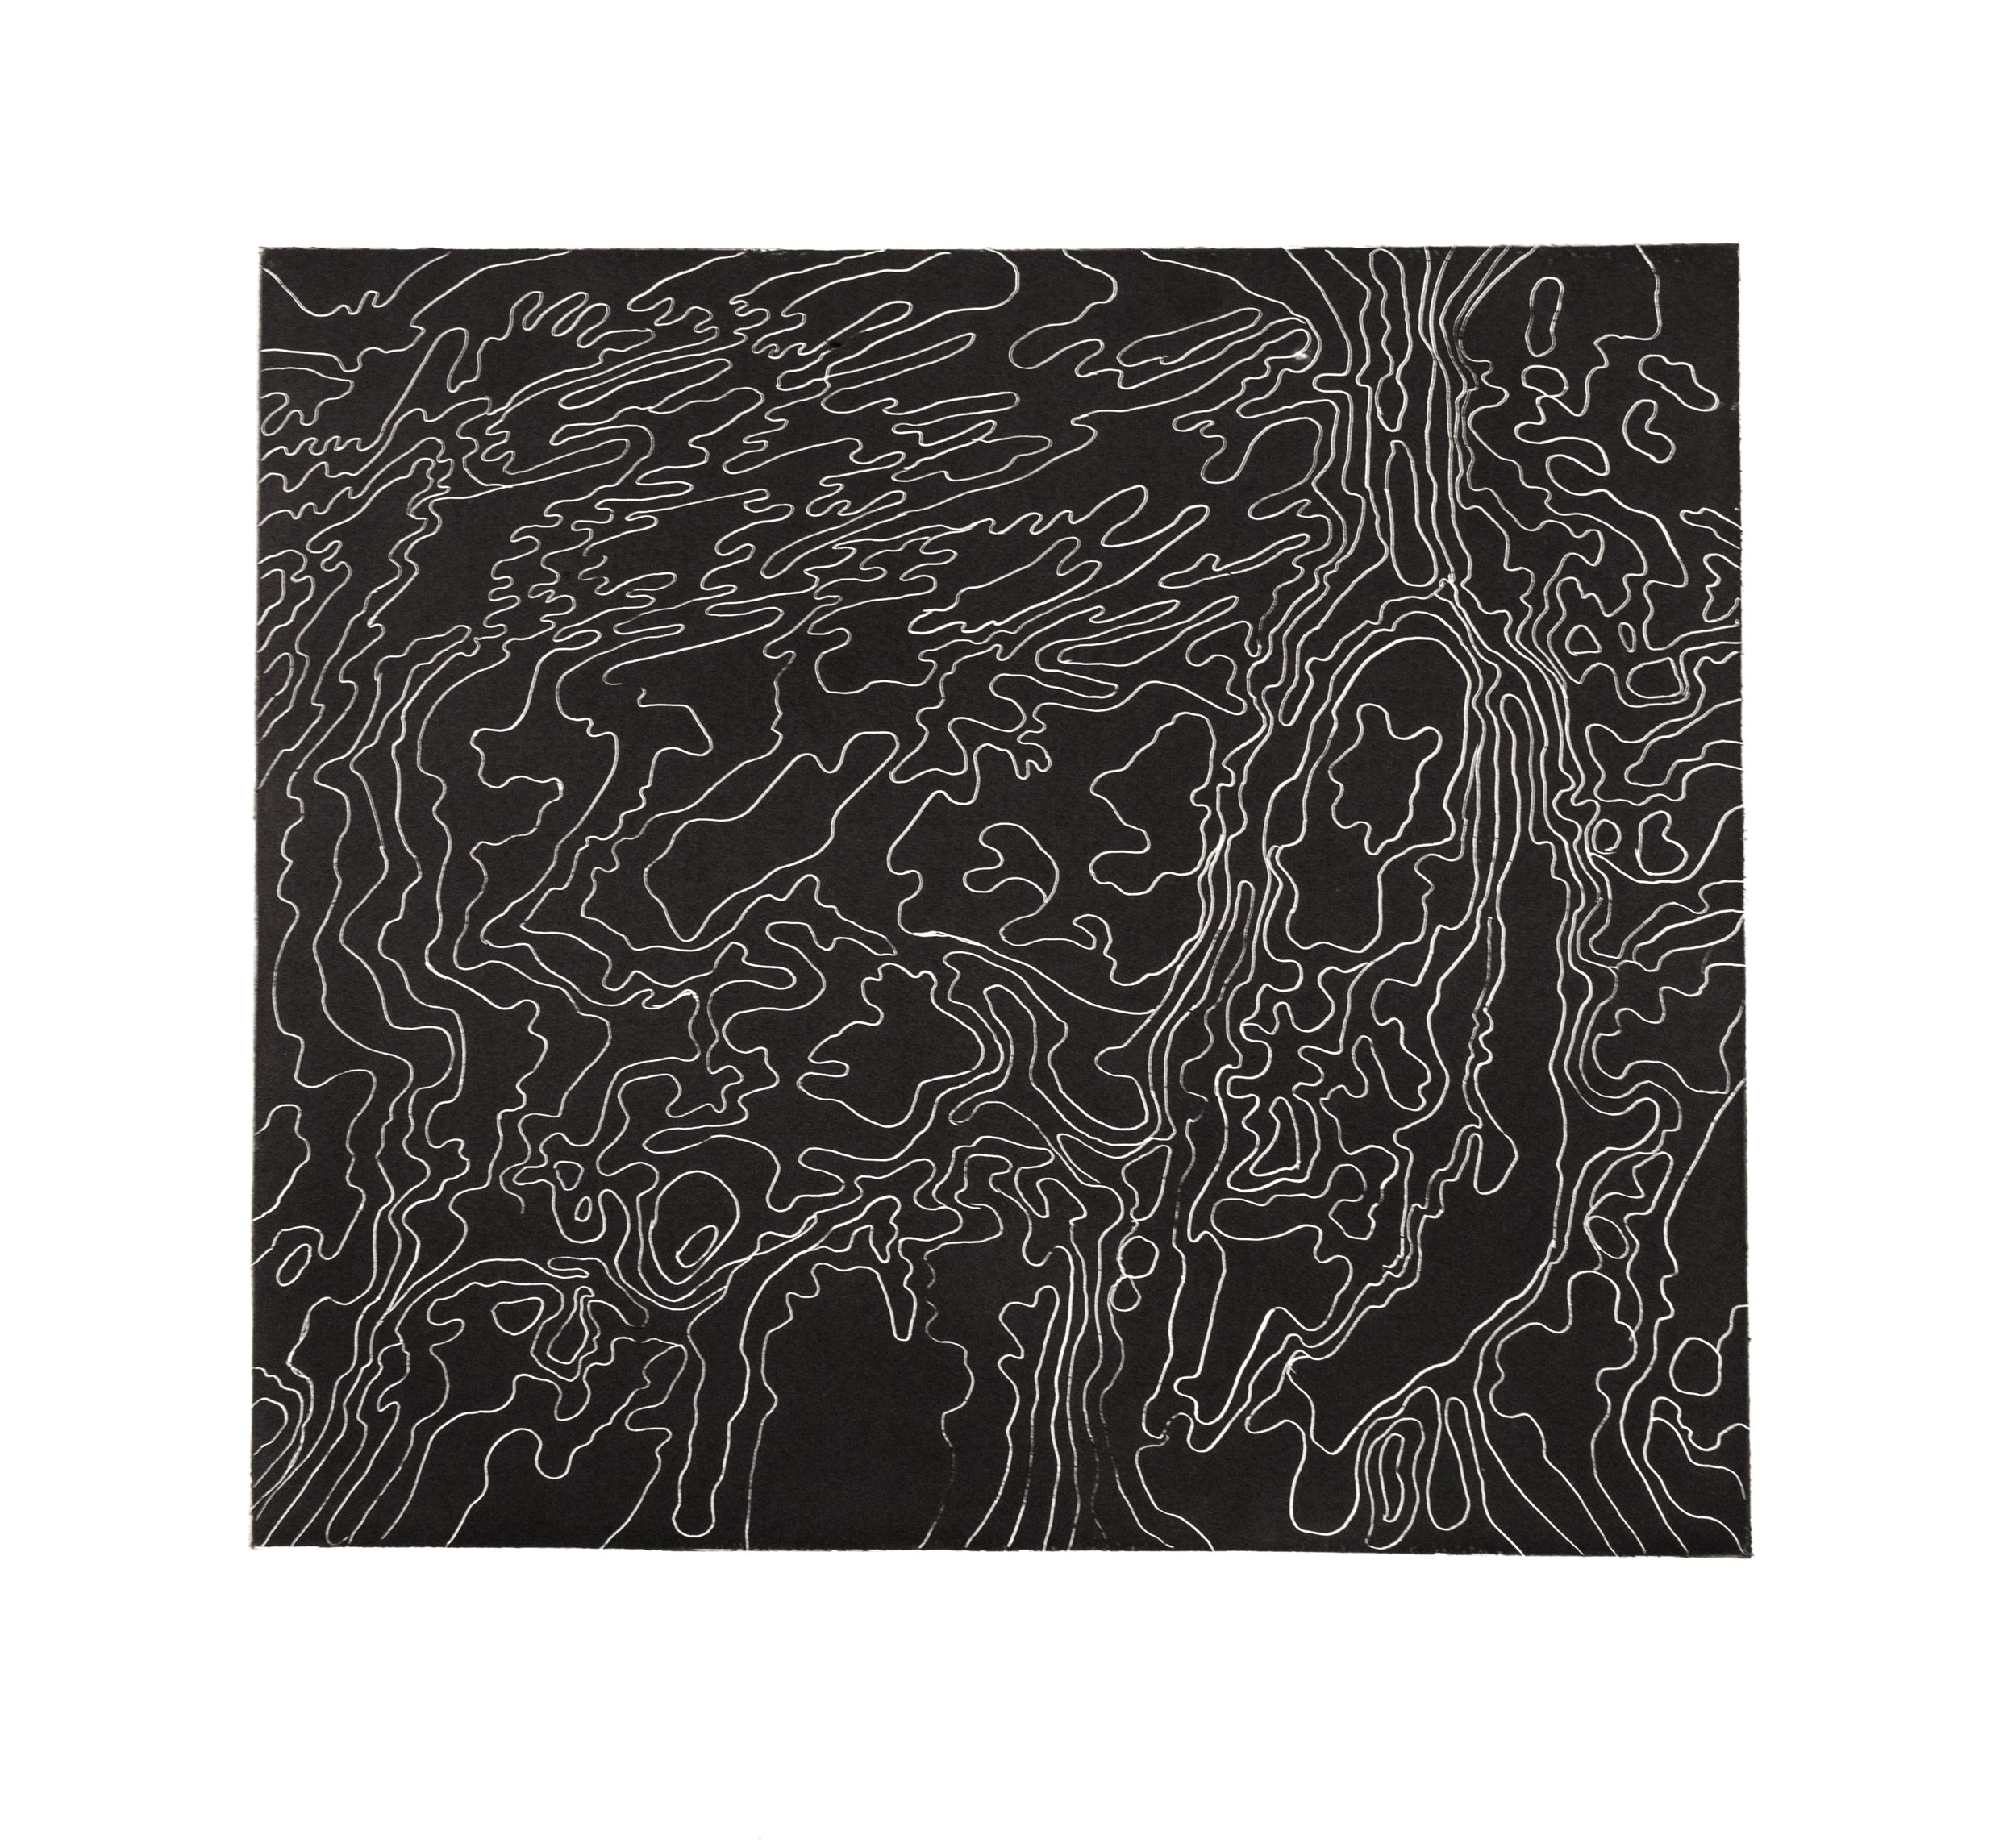    Water 8   Line etching with relief roll, 2015, paper size: 14.75” x 16”, plate size: 10.25” x 11.75”, variable edition  